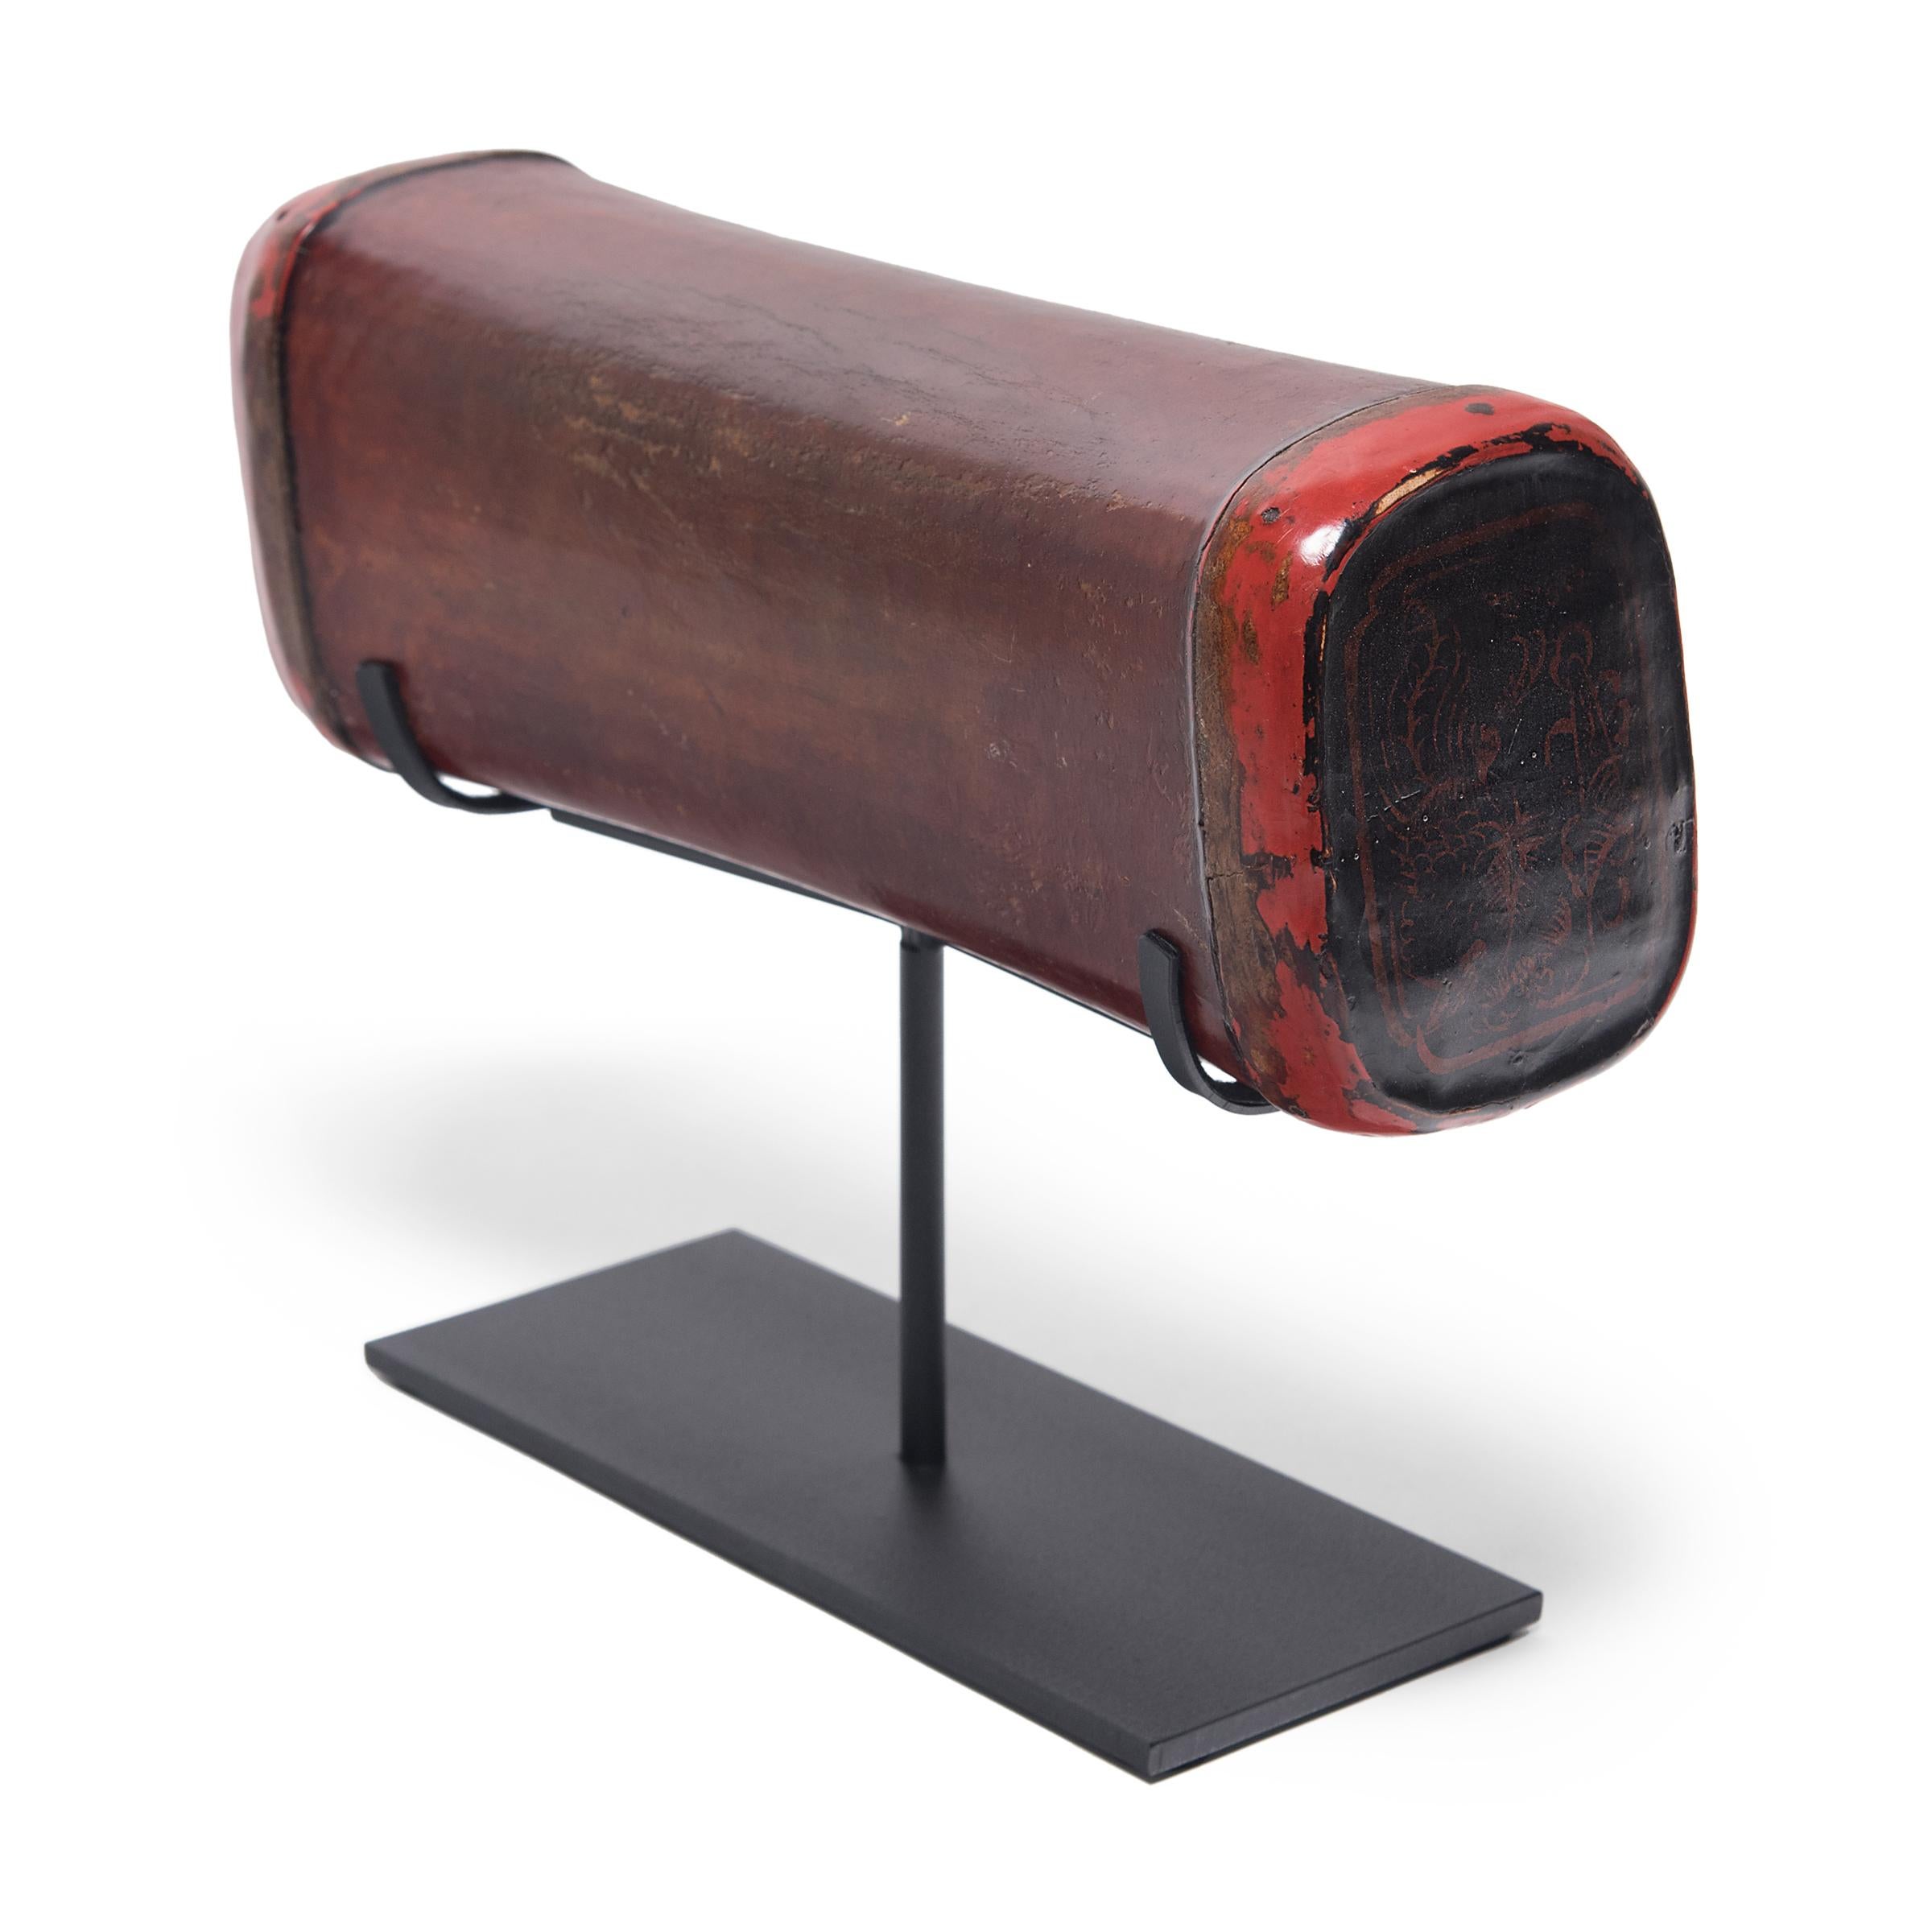 Crafted of painted, lacquered hide, this extraordinary headrest was created in China's Jiangxi province over 150 years ago. Its pliable design enabled contour comfort - quite luxurious for the time. Some scholars think the soft curve and height was